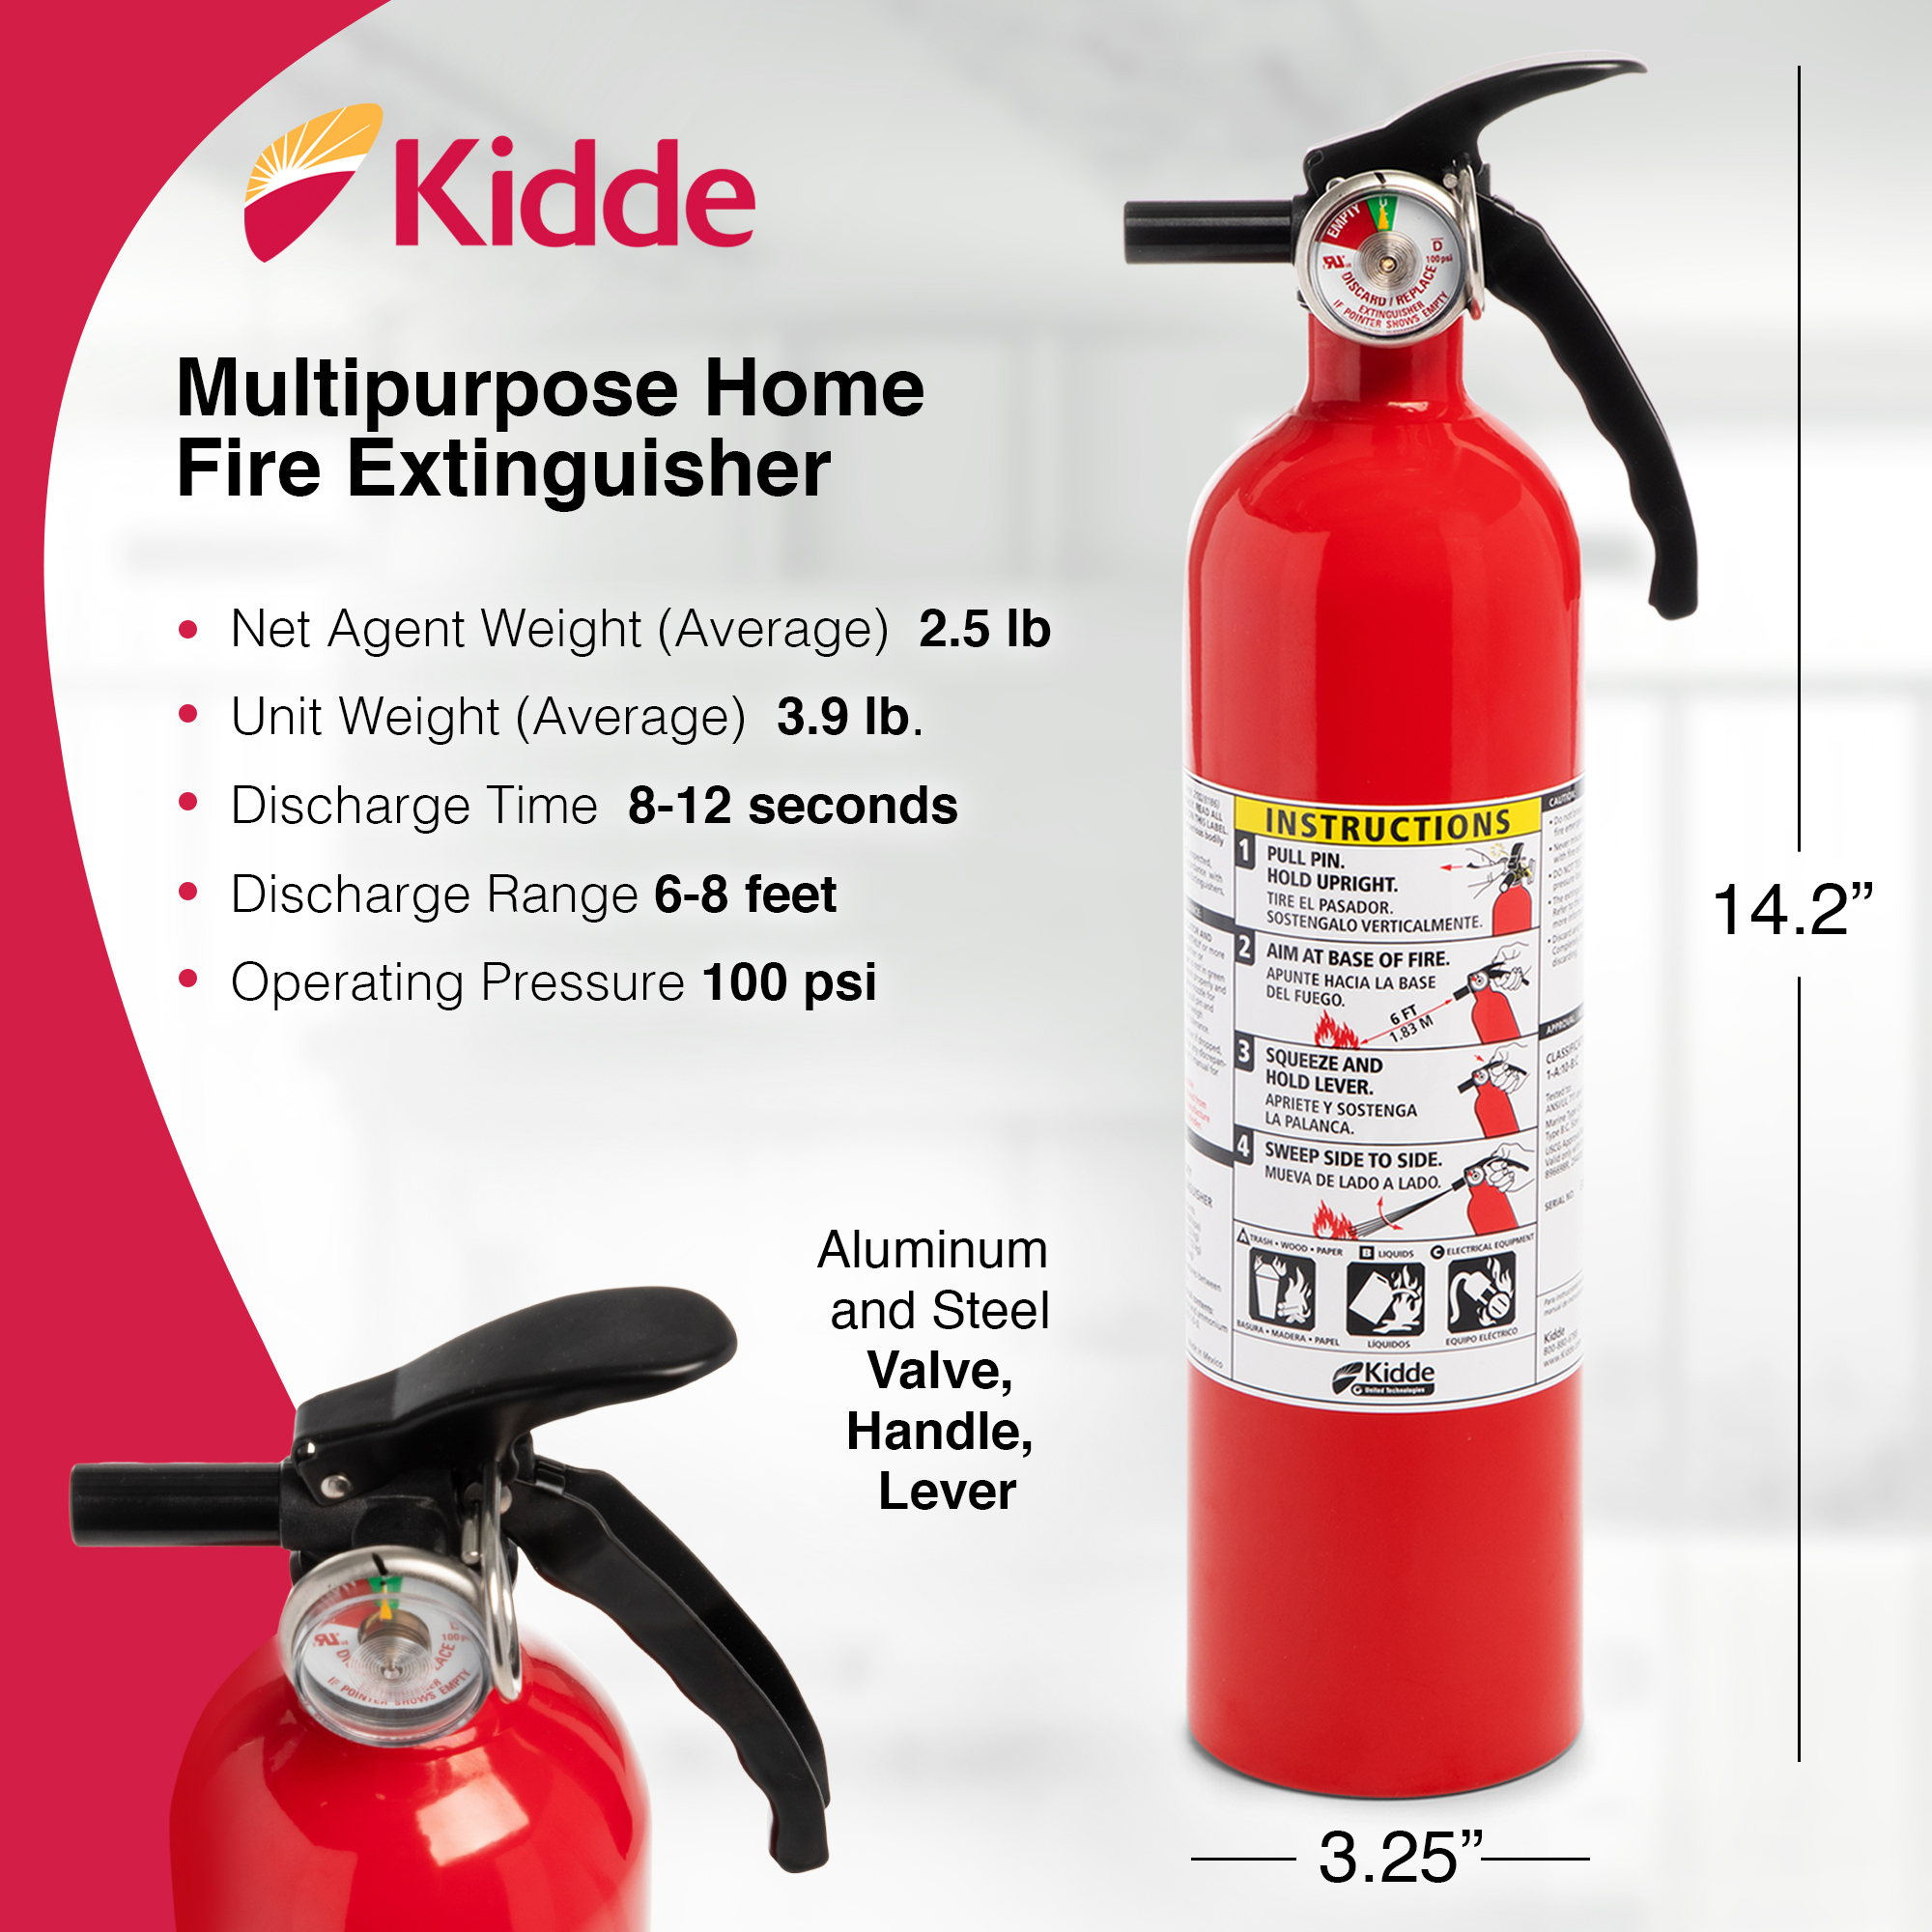 Kidde Multipurpose Home Fire Extinguisher, UL Rated 1-A:10-B:C, Model KD82-110ABC - image 2 of 8